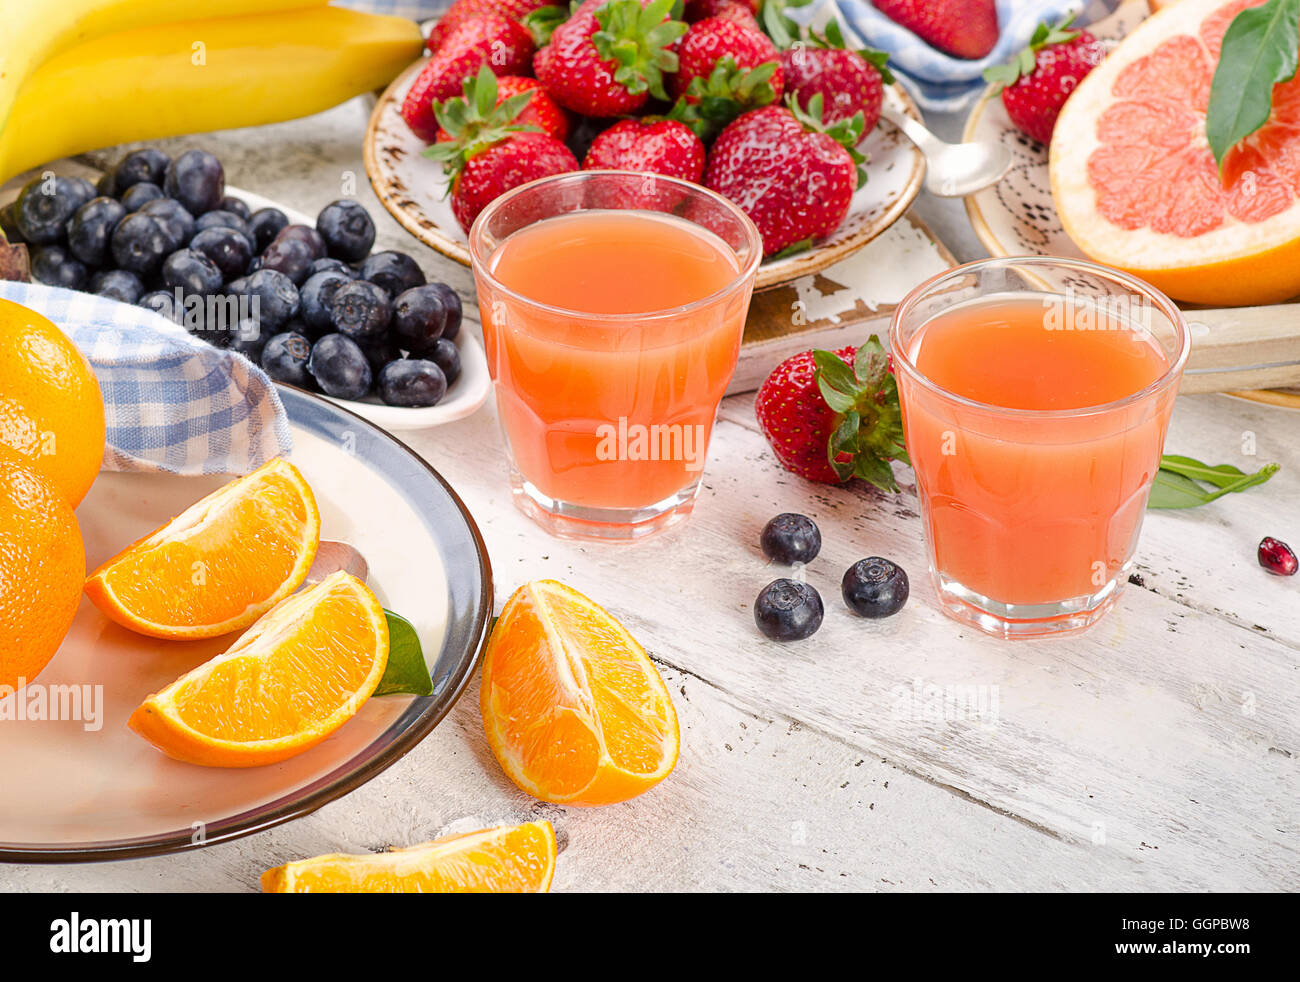 Citrus juice, fruits and berries on wooden background. Healthy eating. Top view Stock Photo